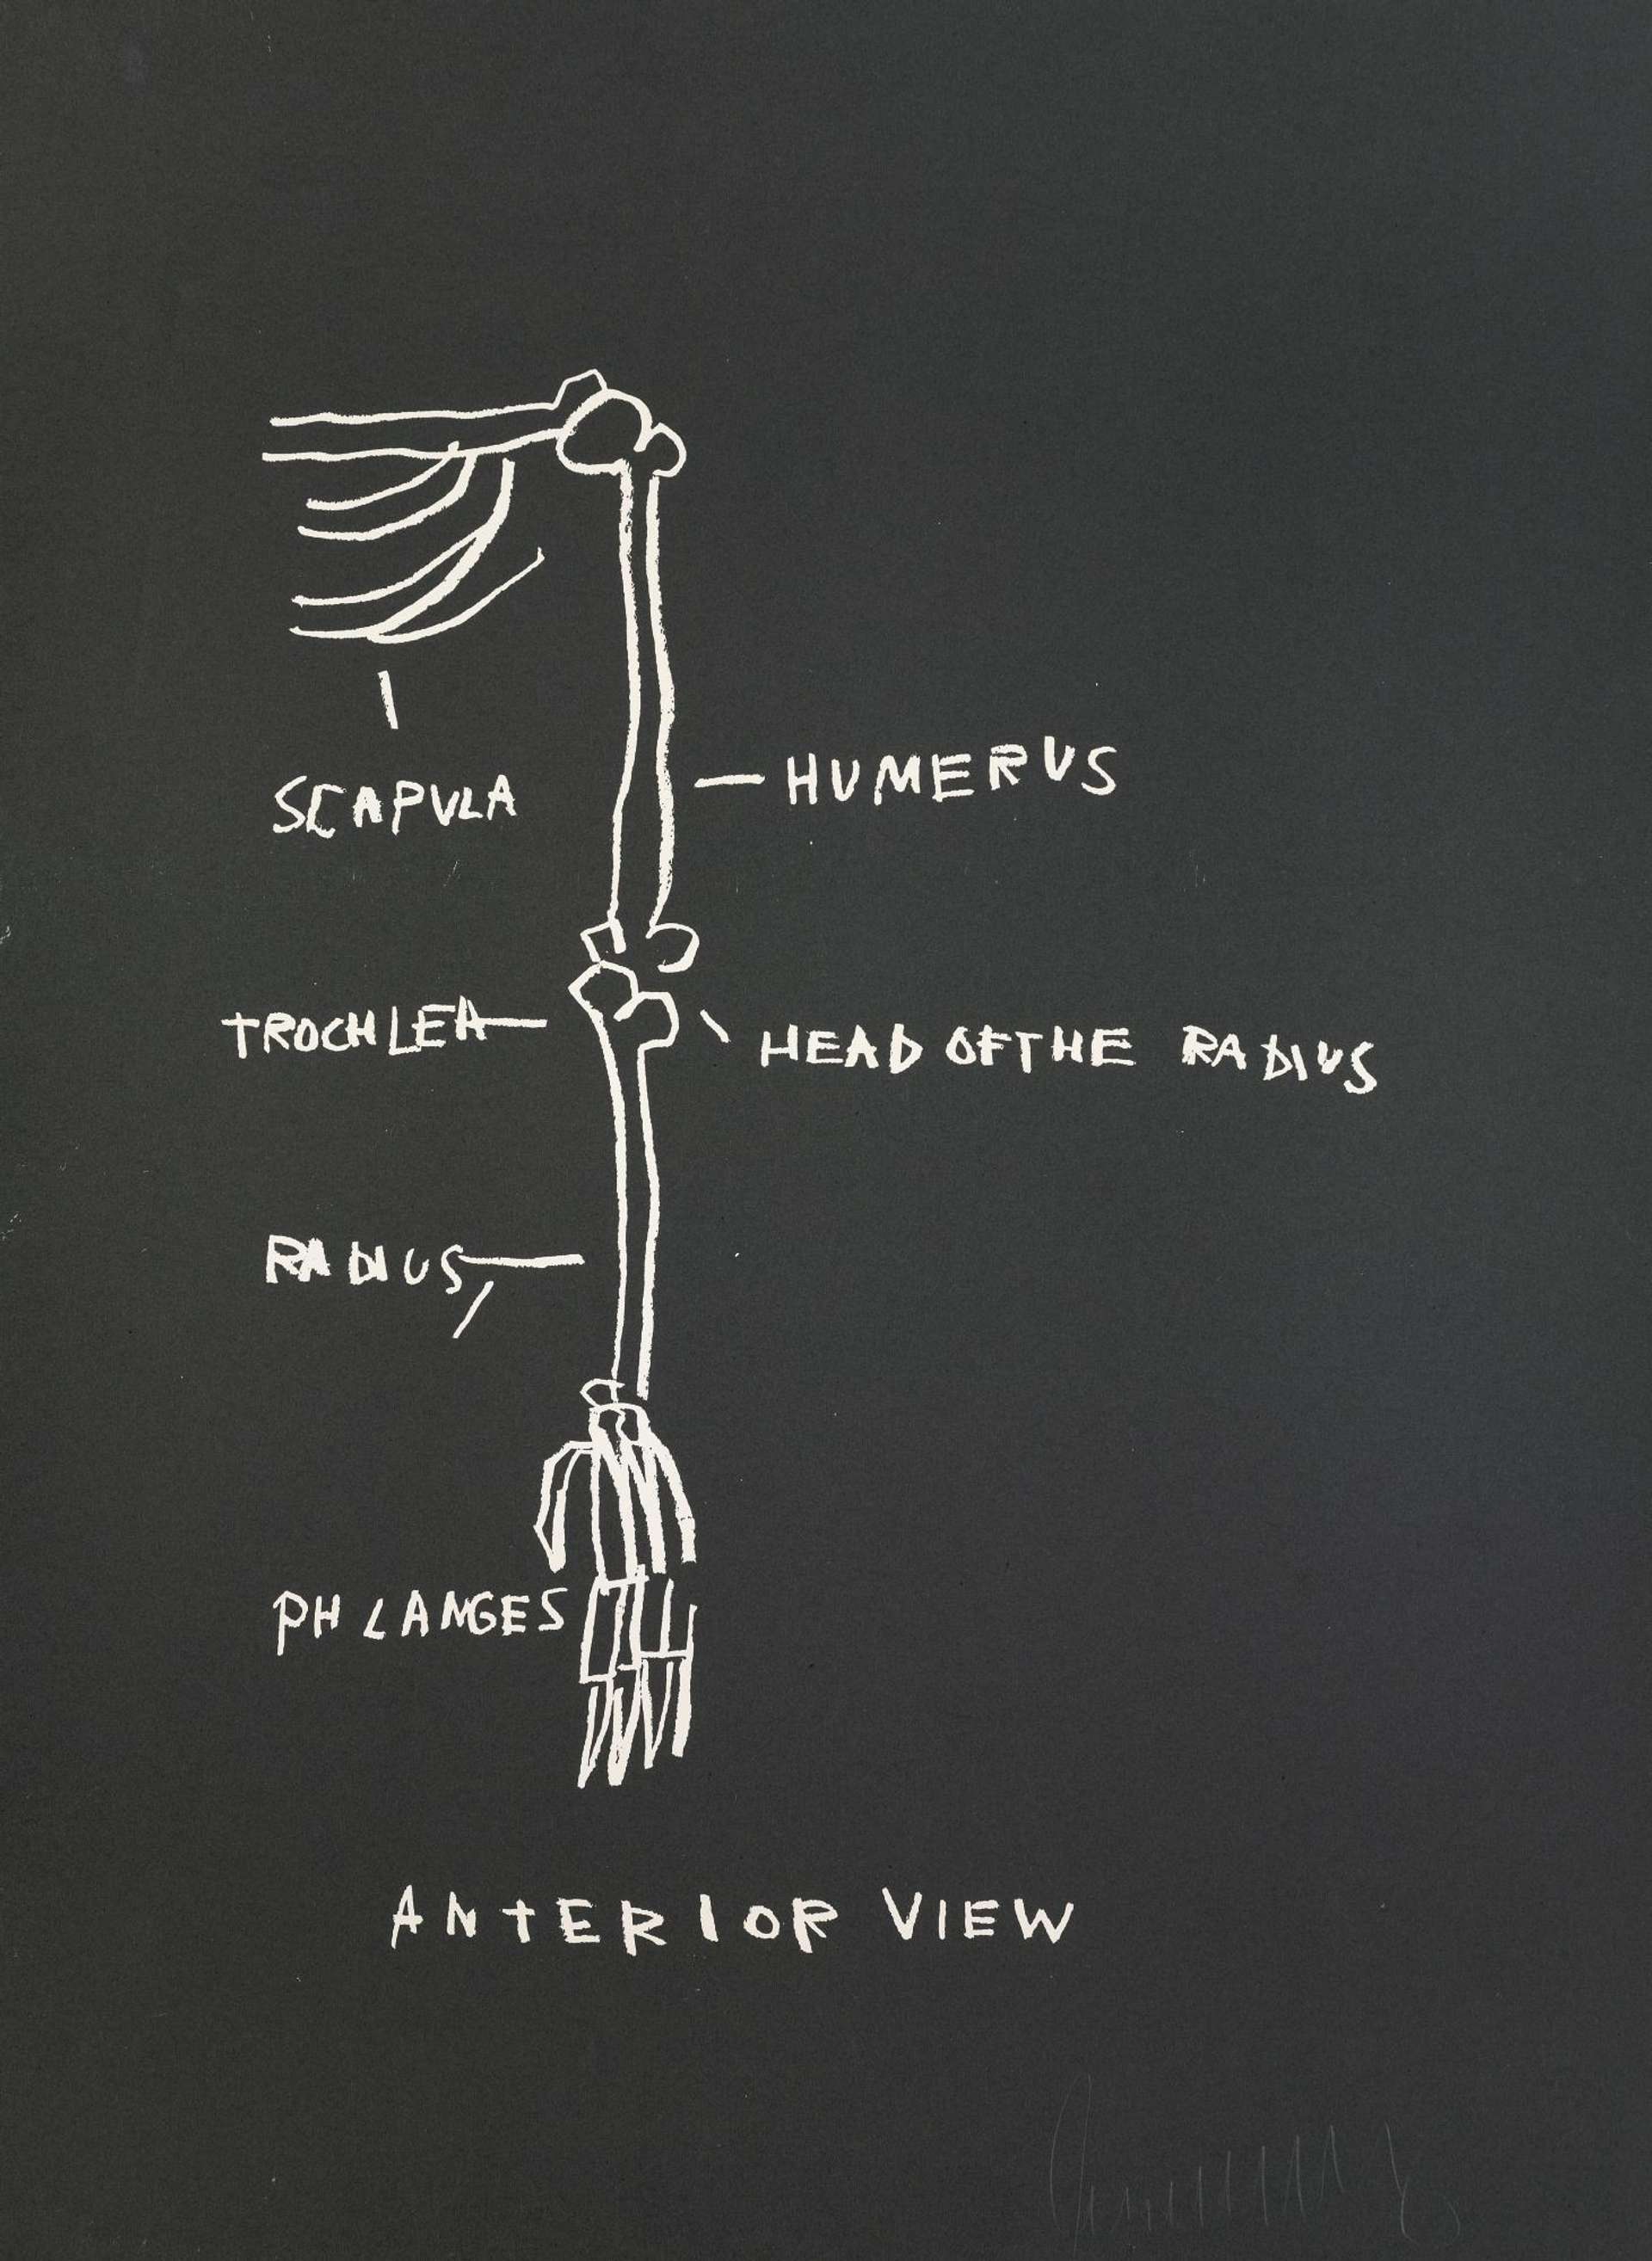 Jean-Michel Basquiat’s Anatomy, Anterior View. A black screenprint featuring white anatomical drawings of a human arm and hand with descriptive labels.